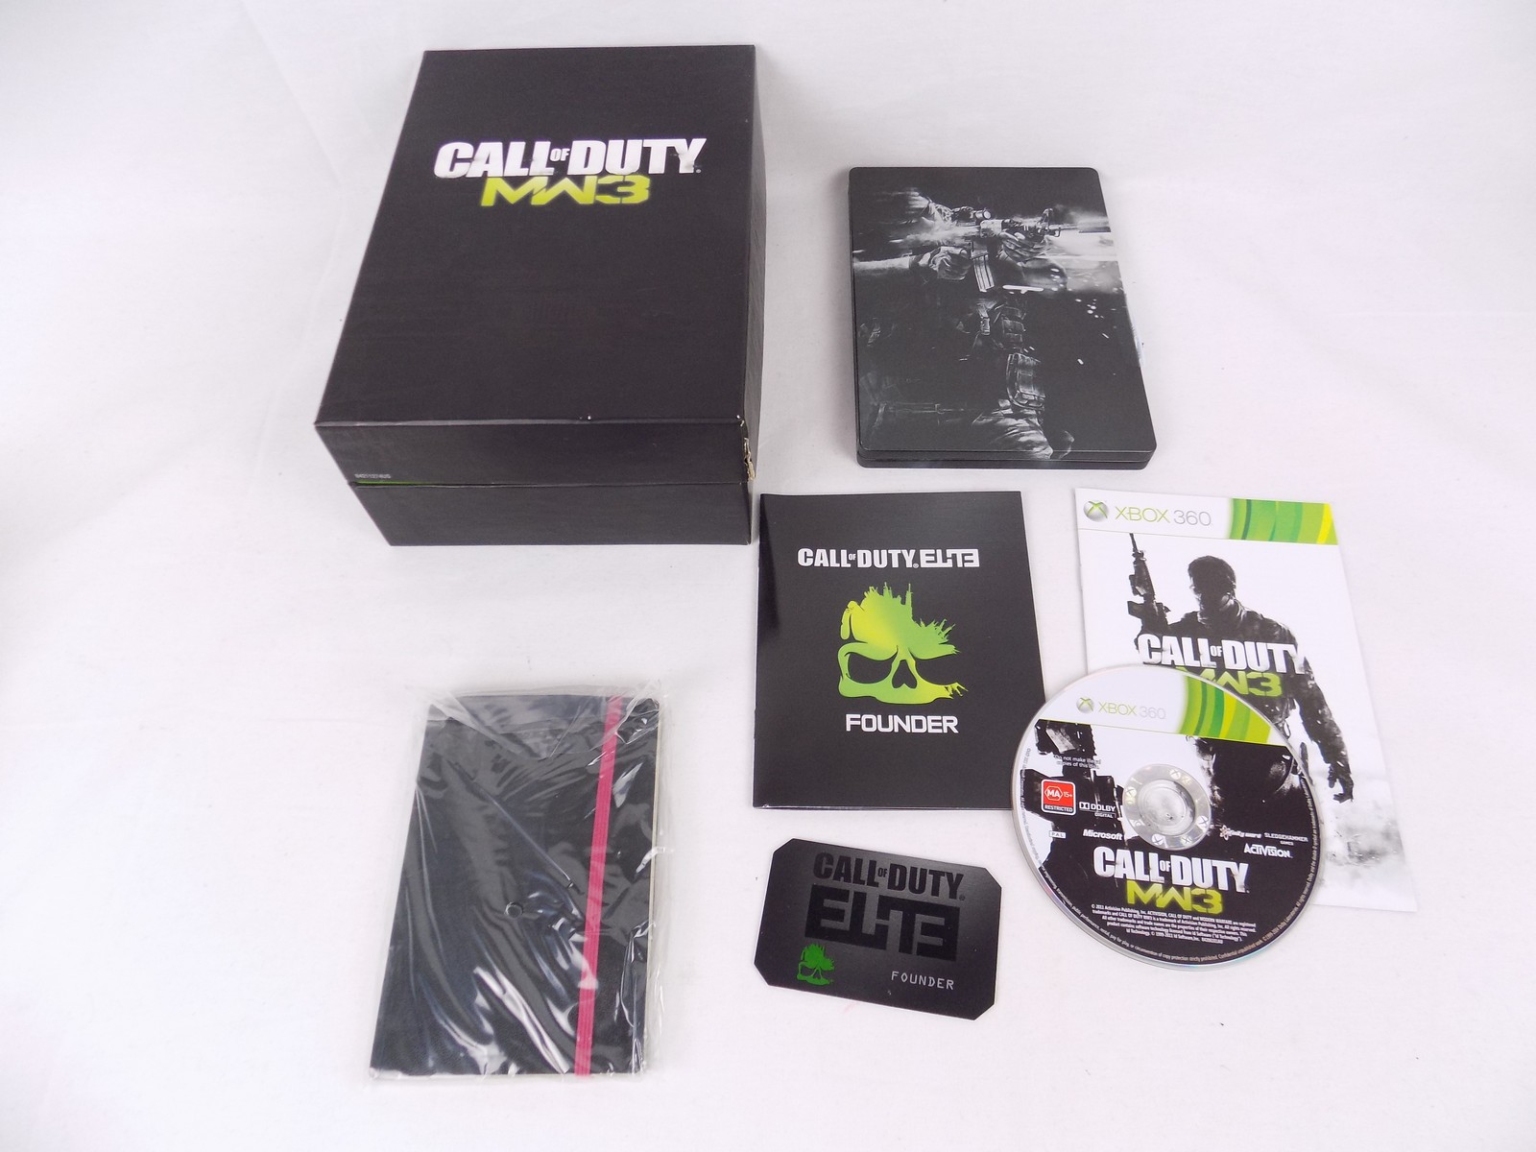 Xbox 360 Call of Duty Modern Warfare 3 Elite Founder Edition Collector's Steel Book Starboard